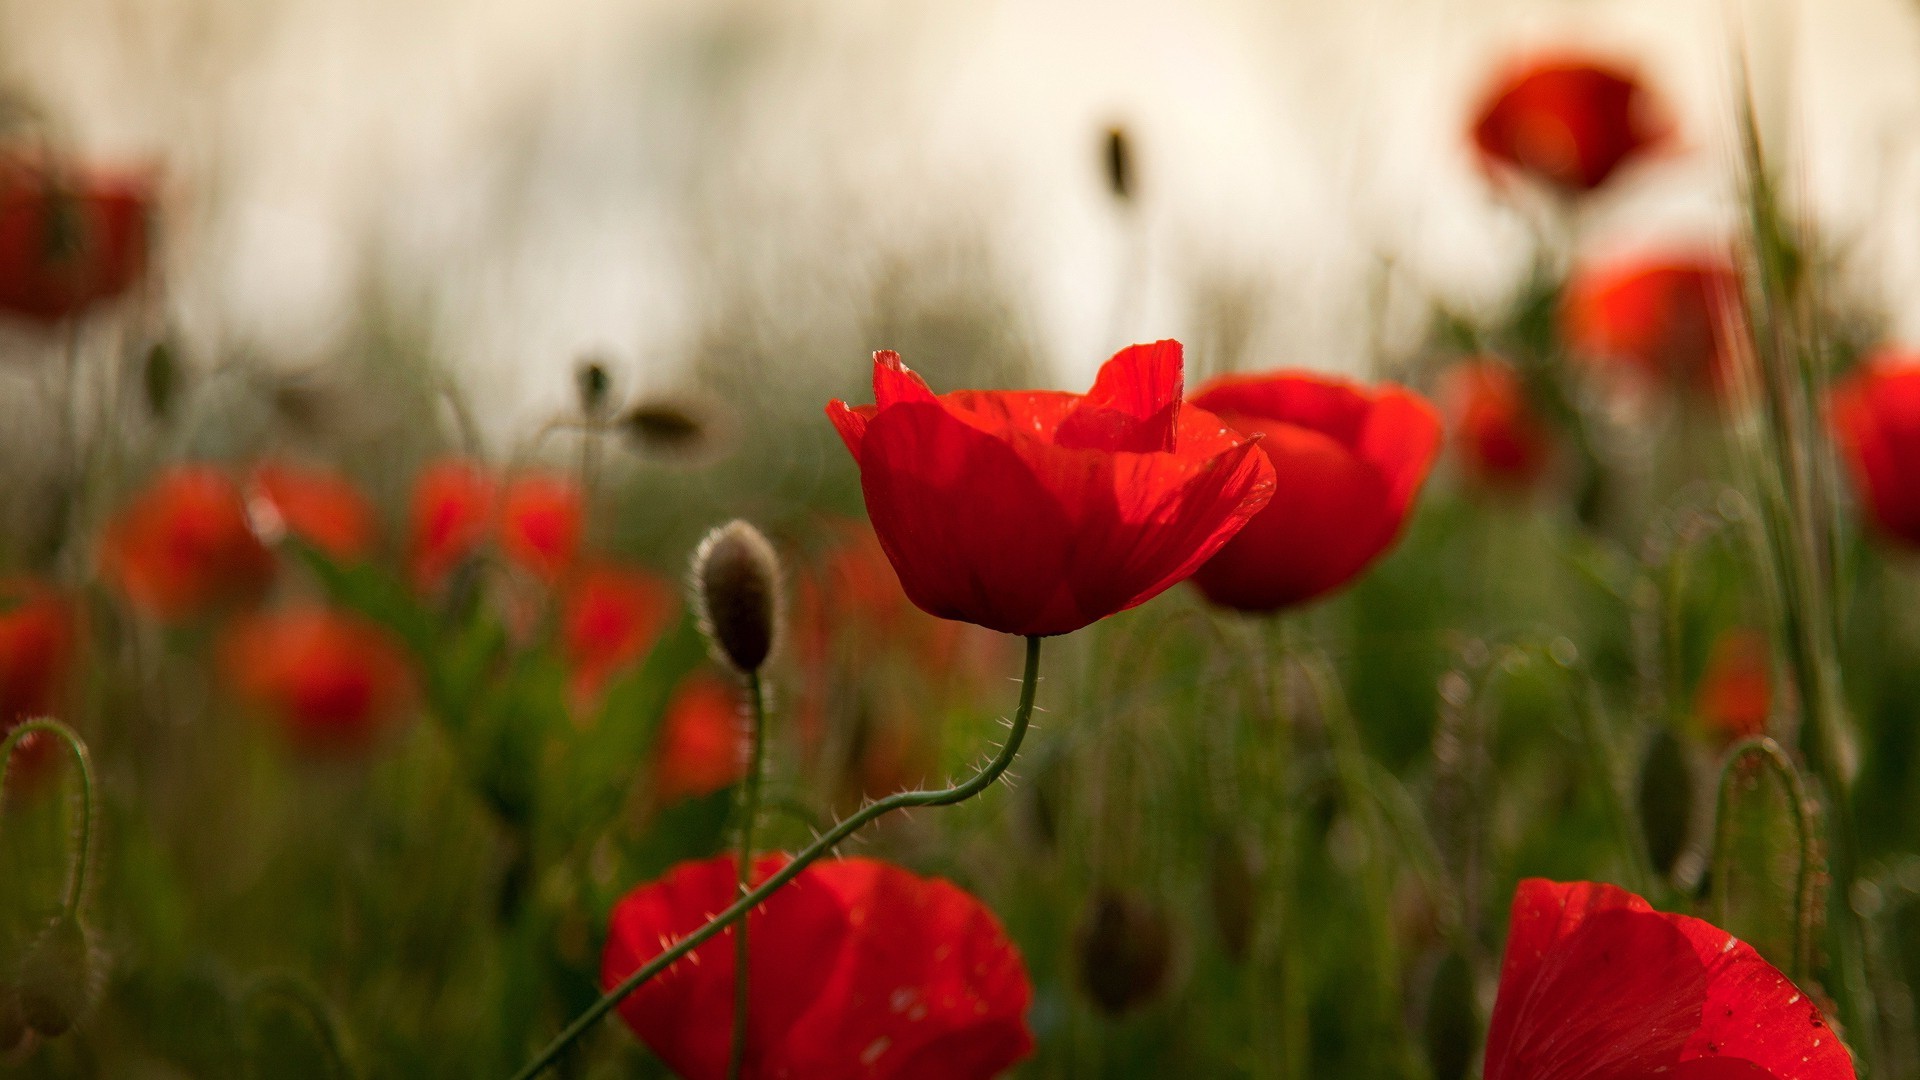 Wallpapers flowers poppies red flowers on the desktop